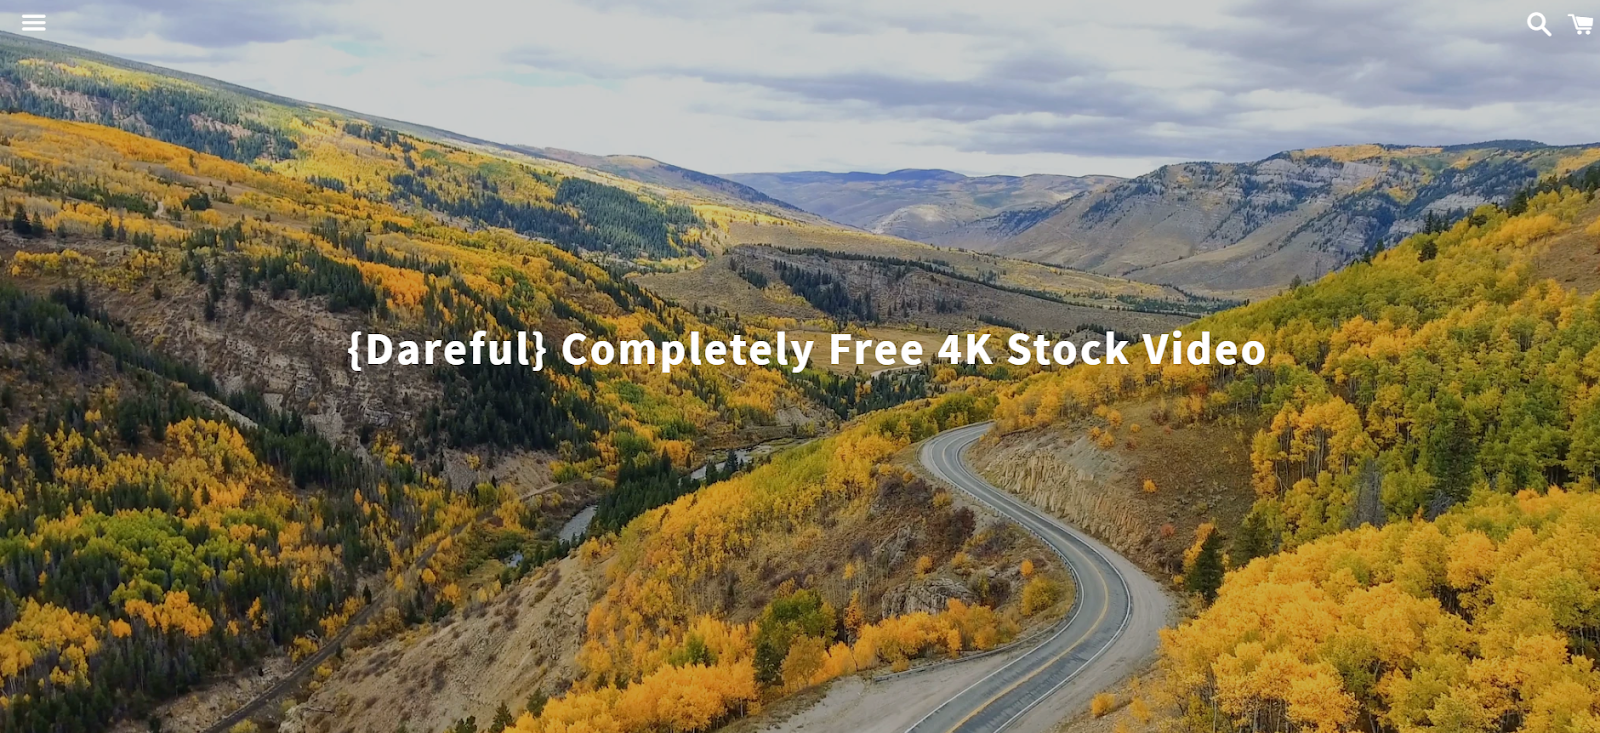 dareful a website for stock video download